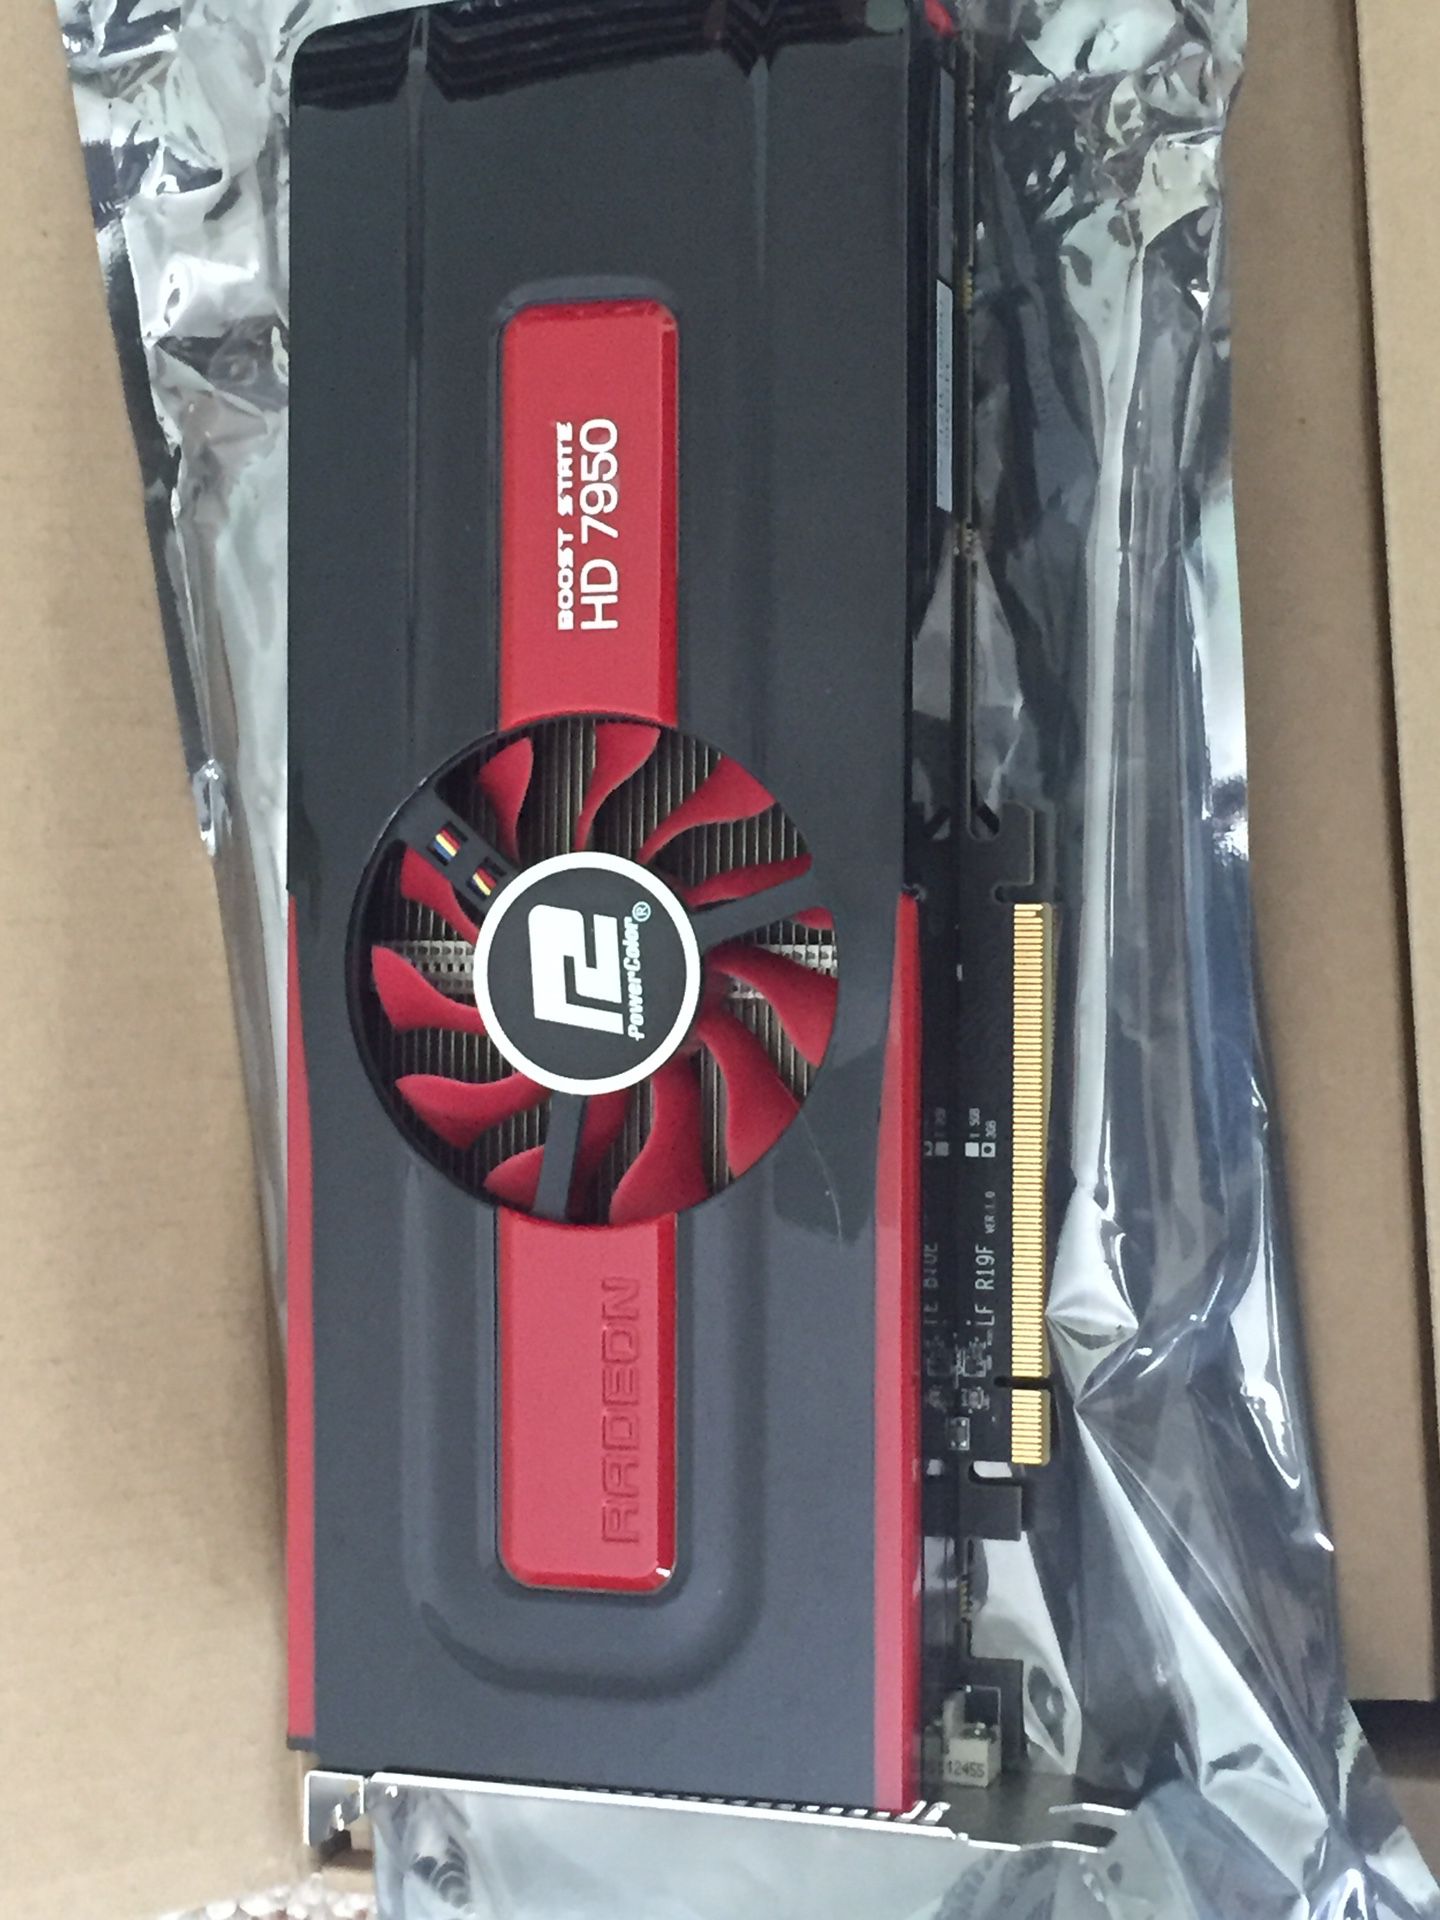 PowerColor Boost State Radeon HD 7950 video card